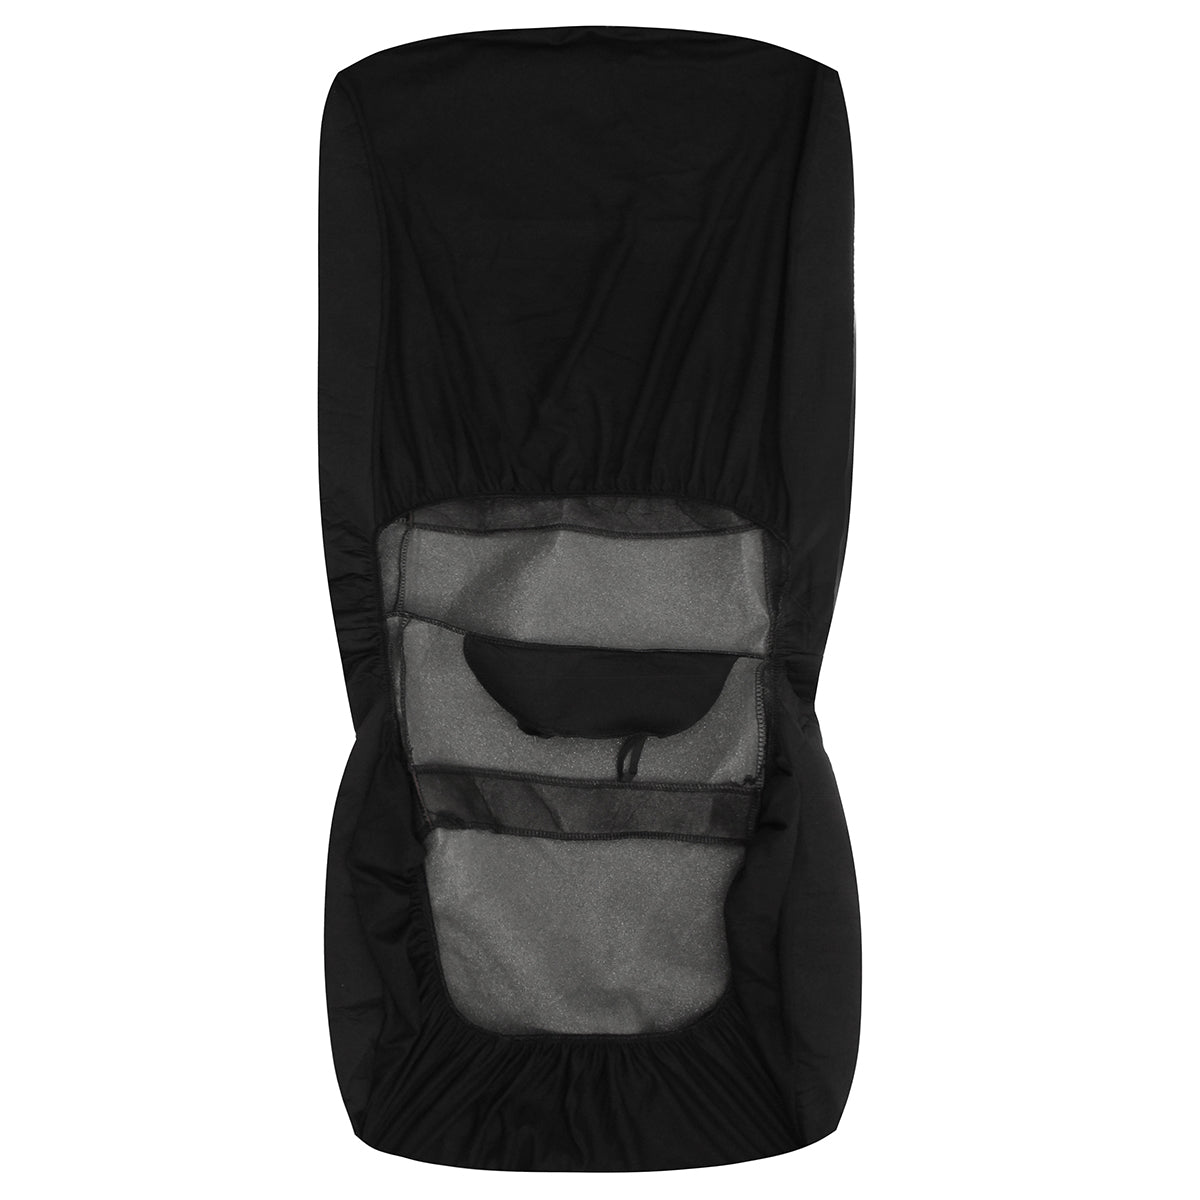 Black Universal Full Set Car Seat Covers Front Rear Polyester 5 Heads Auto Black